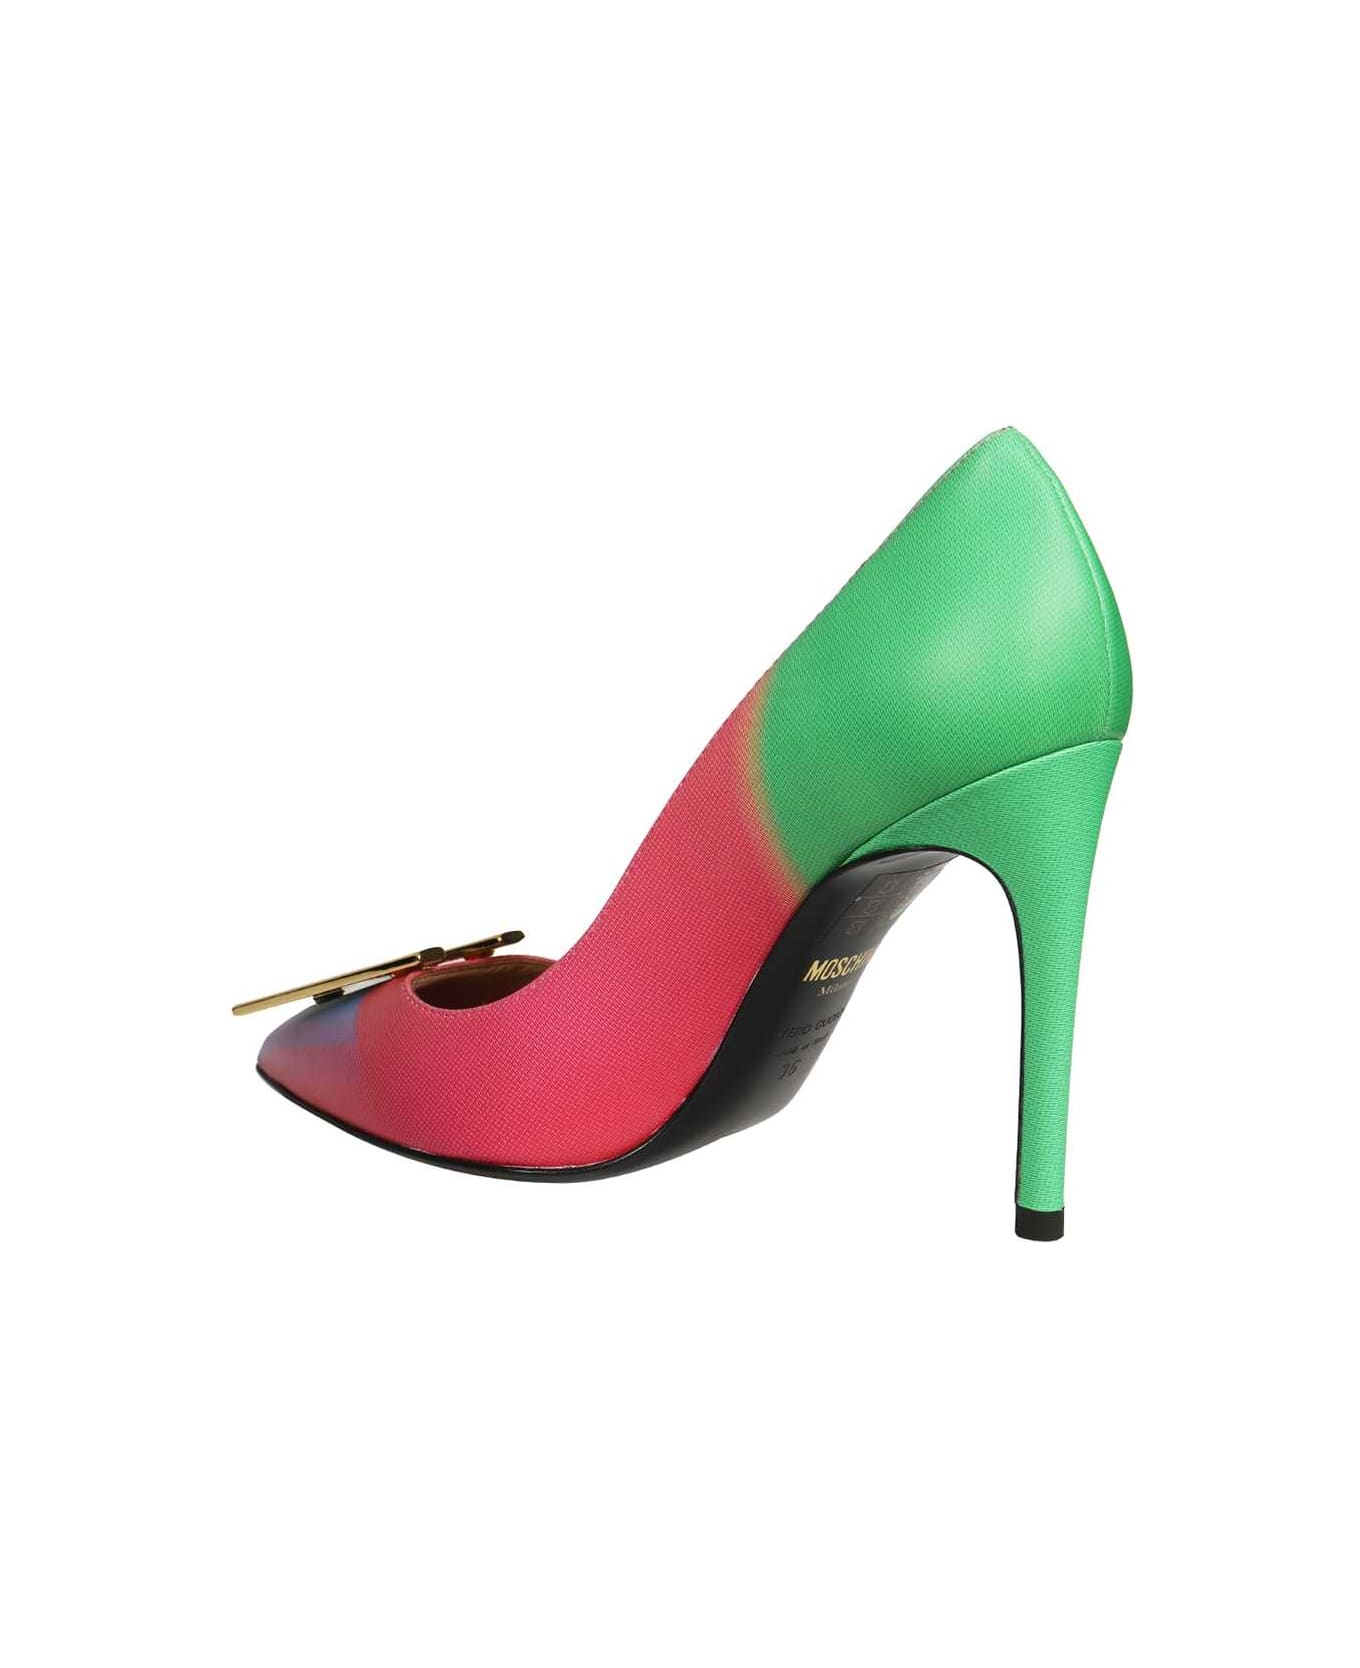 Moschino Leather Pumps - Multicolor